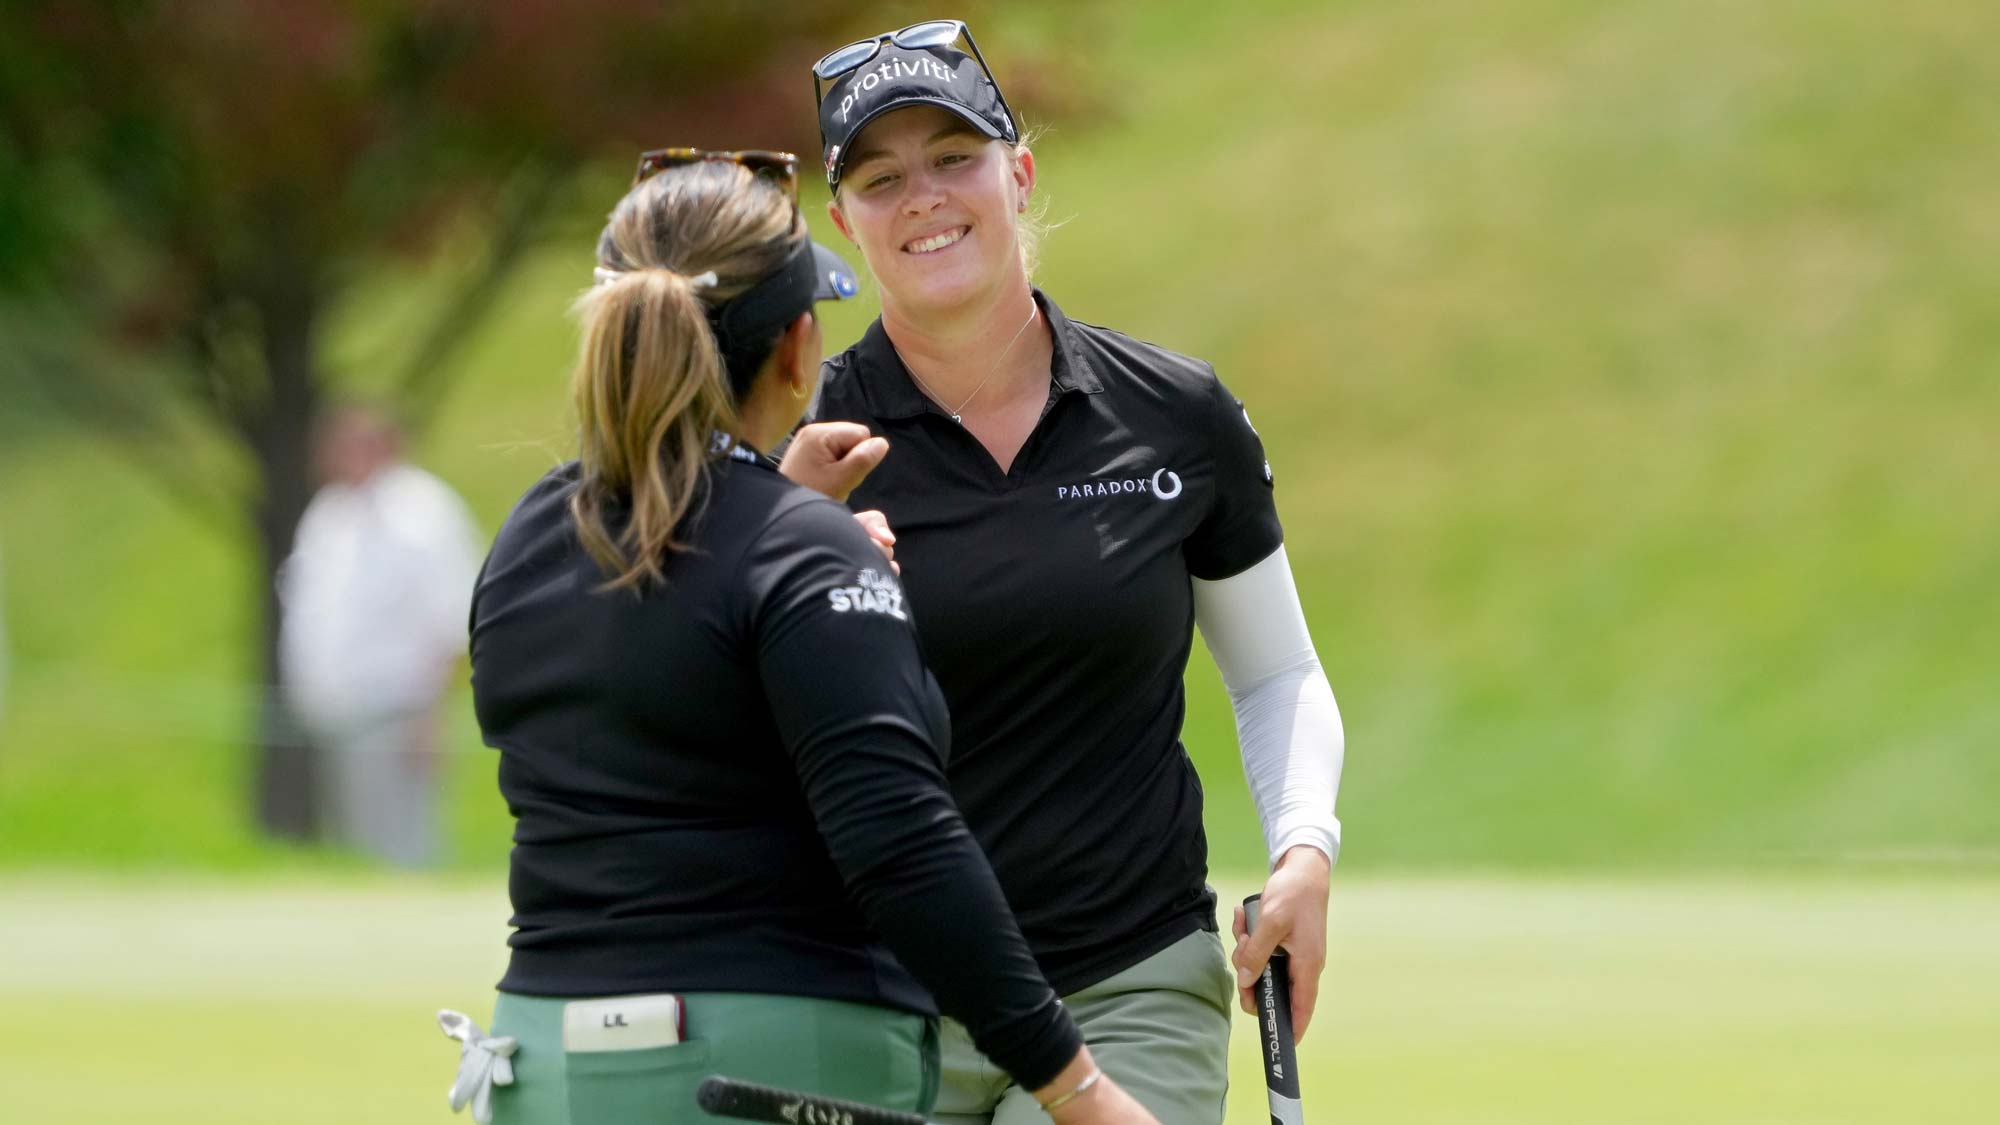 Lizette Salas of the United States (L) and Jennifer Kupcho of the United States celebrate after making birdie on the seventh green during the final round of the Dow Great Lakes Bay Invitational 